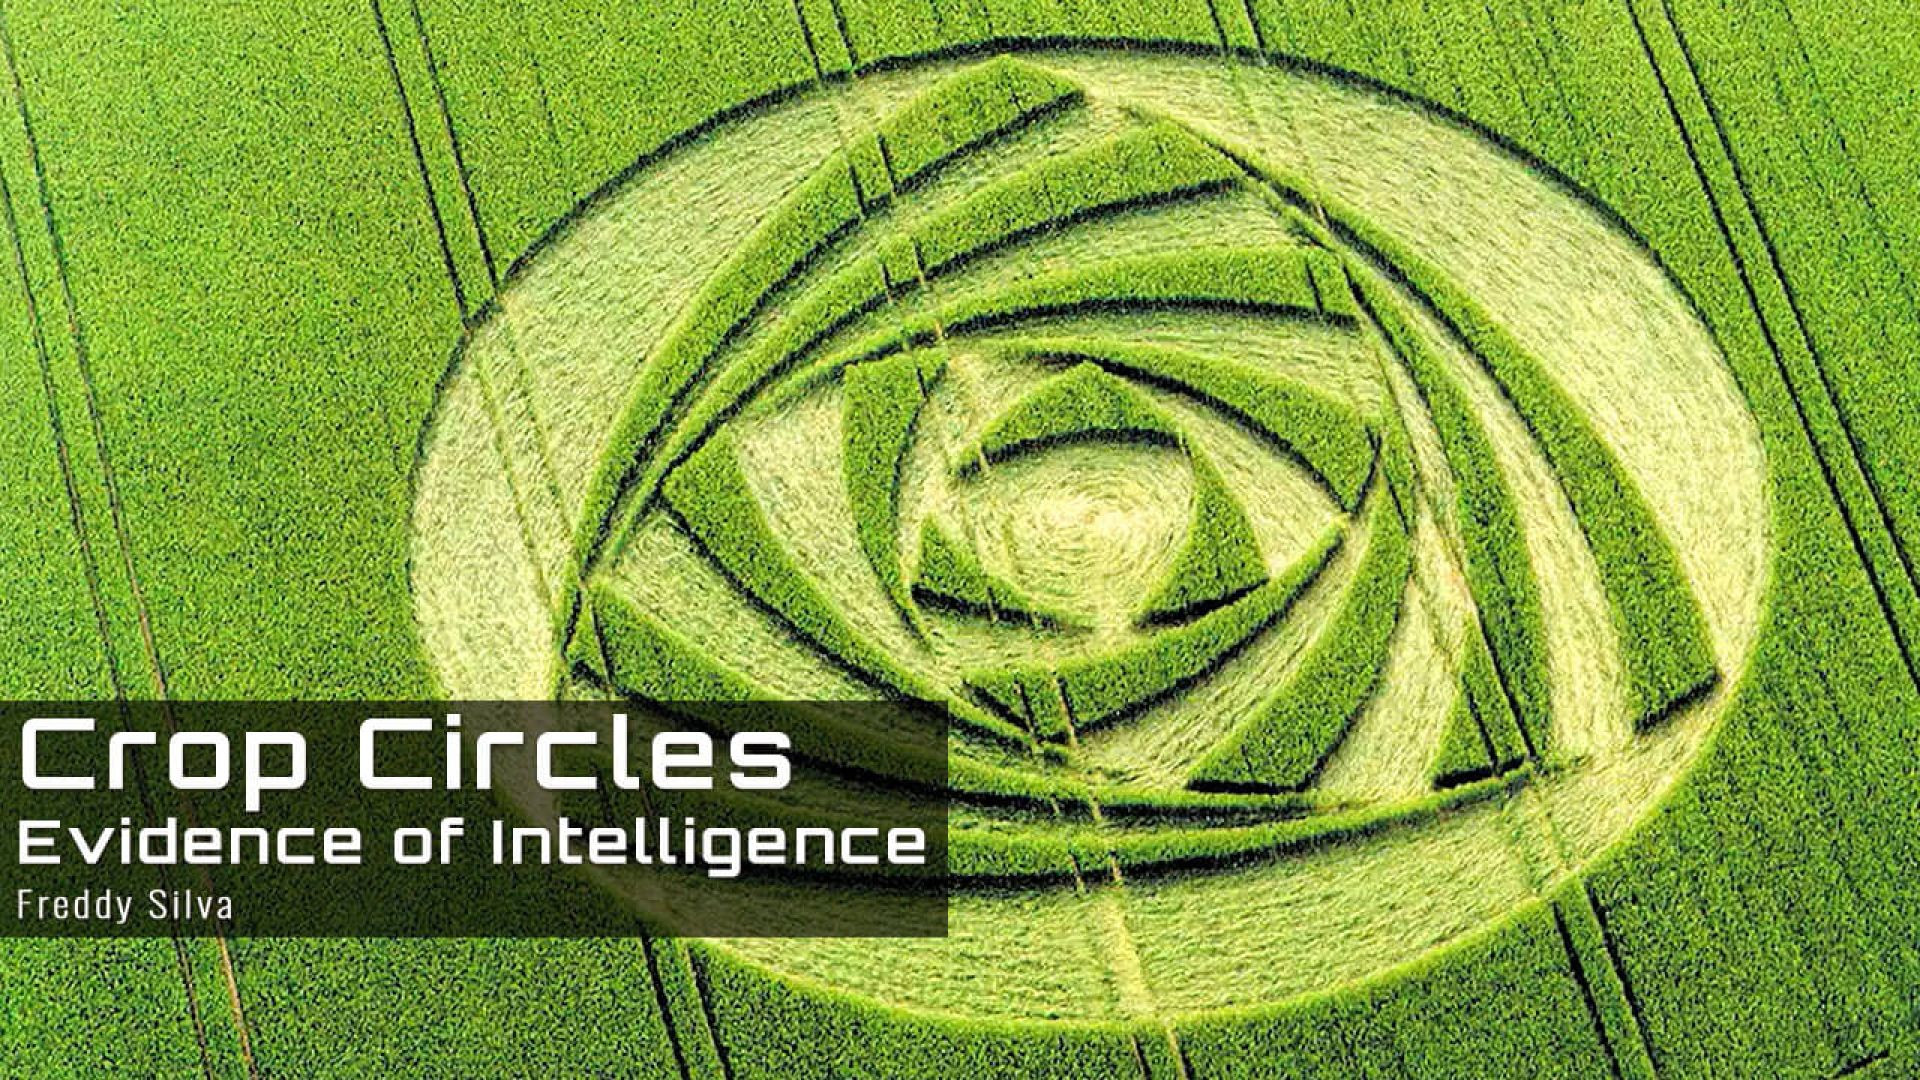 Crop Circles - Evidence of Intelligence (2019) - Freddy Silva’s Lecture